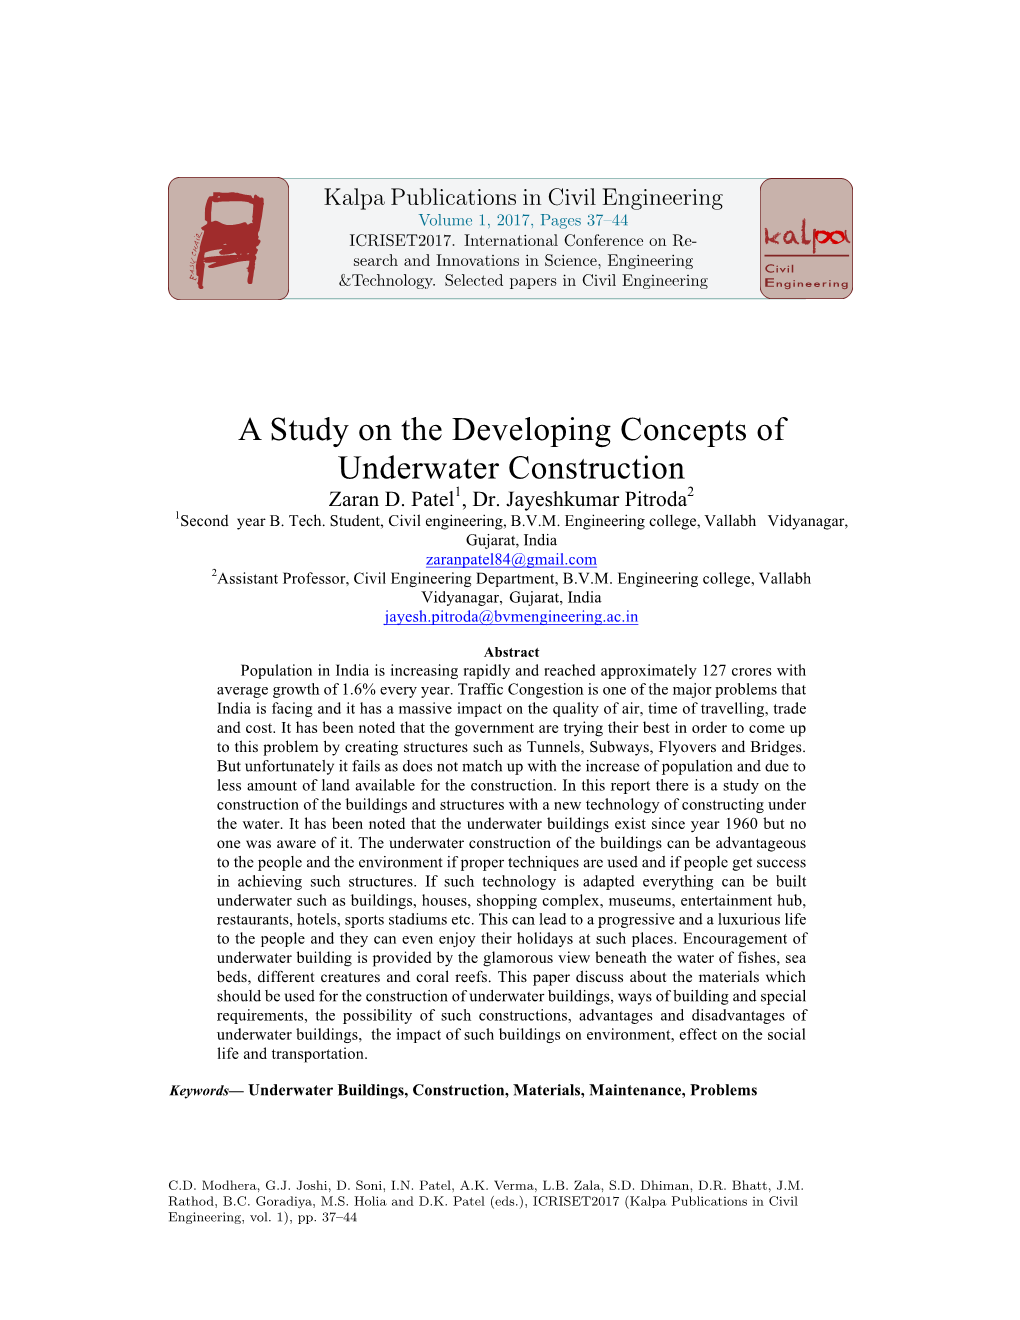 A Study on the Developing Concepts of Underwater Construction Zaran D